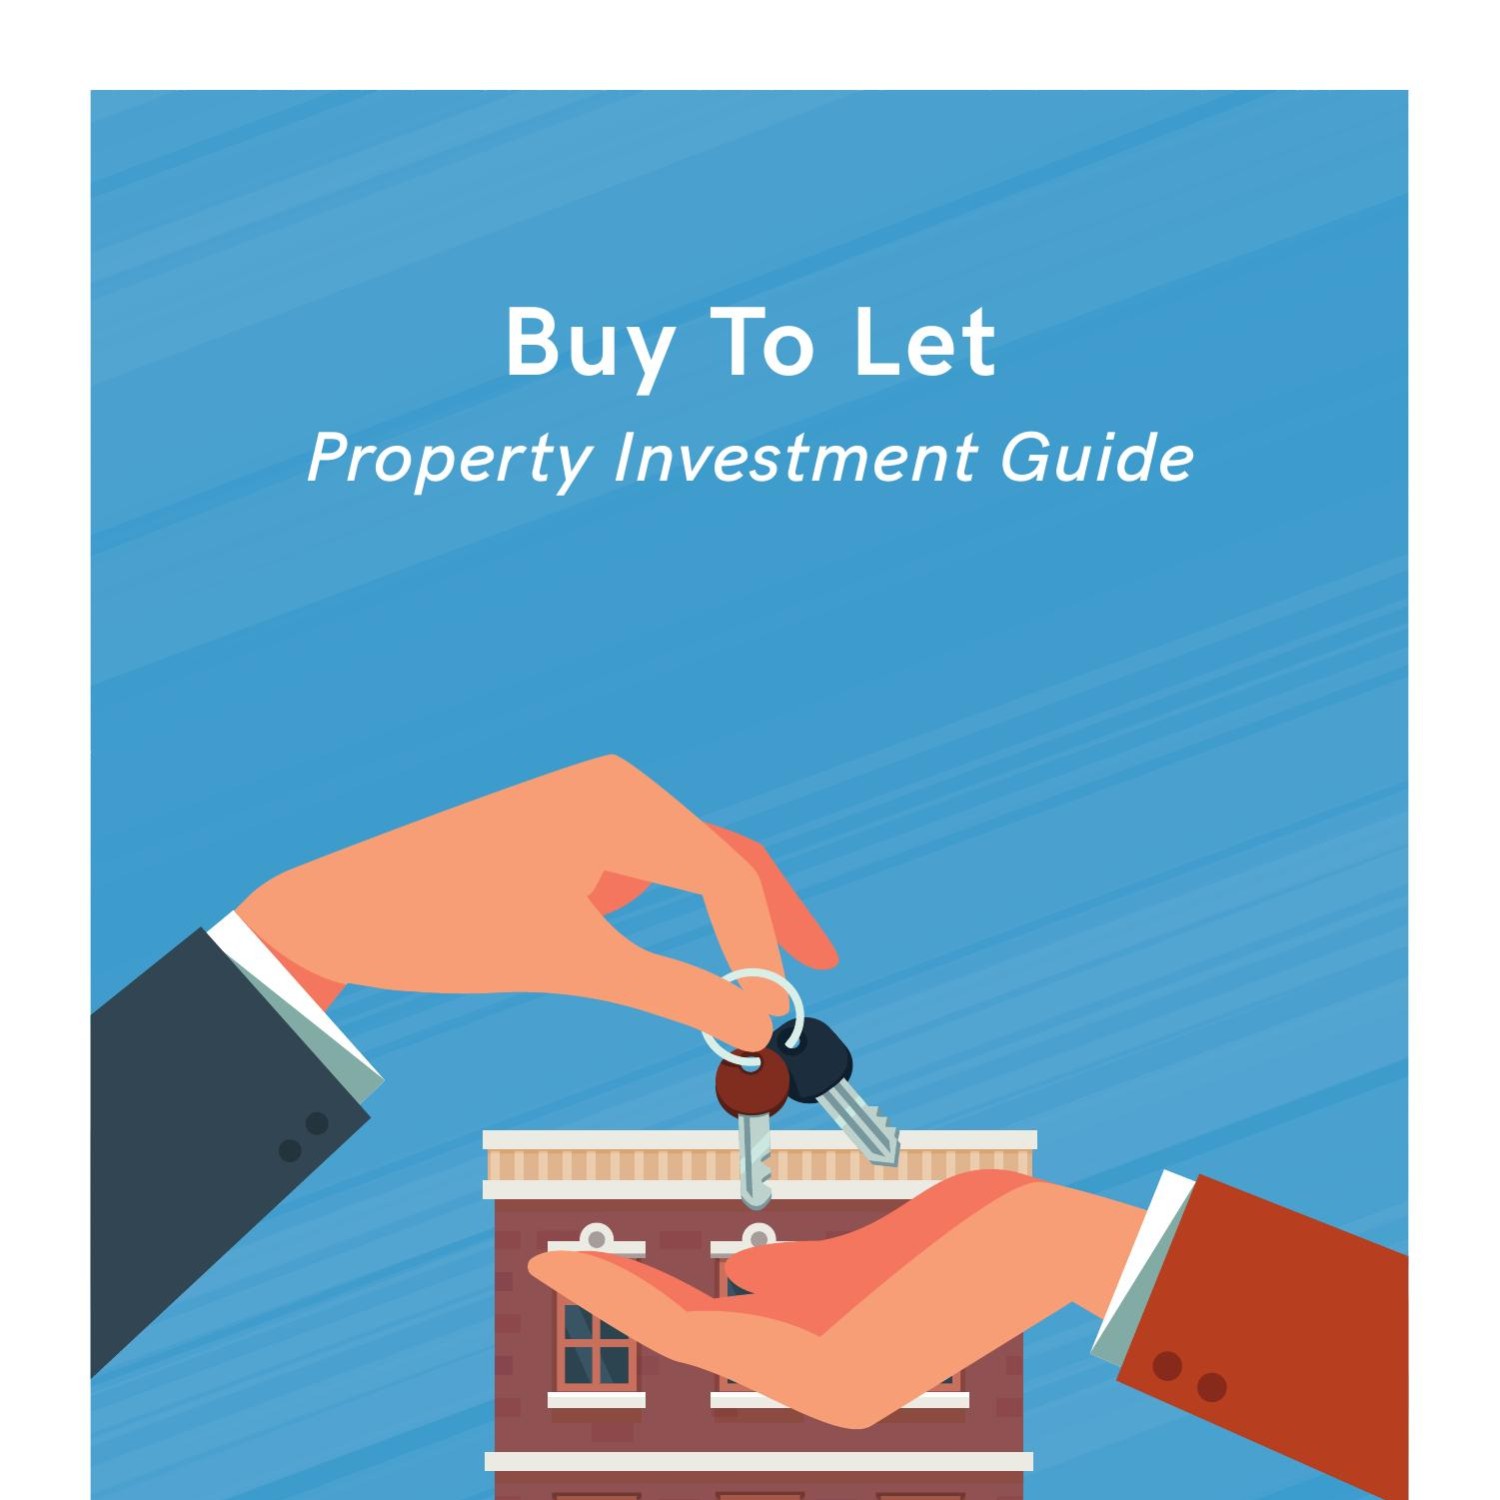 Buy To Let Investment Guide RWinvest.pdf DocDroid